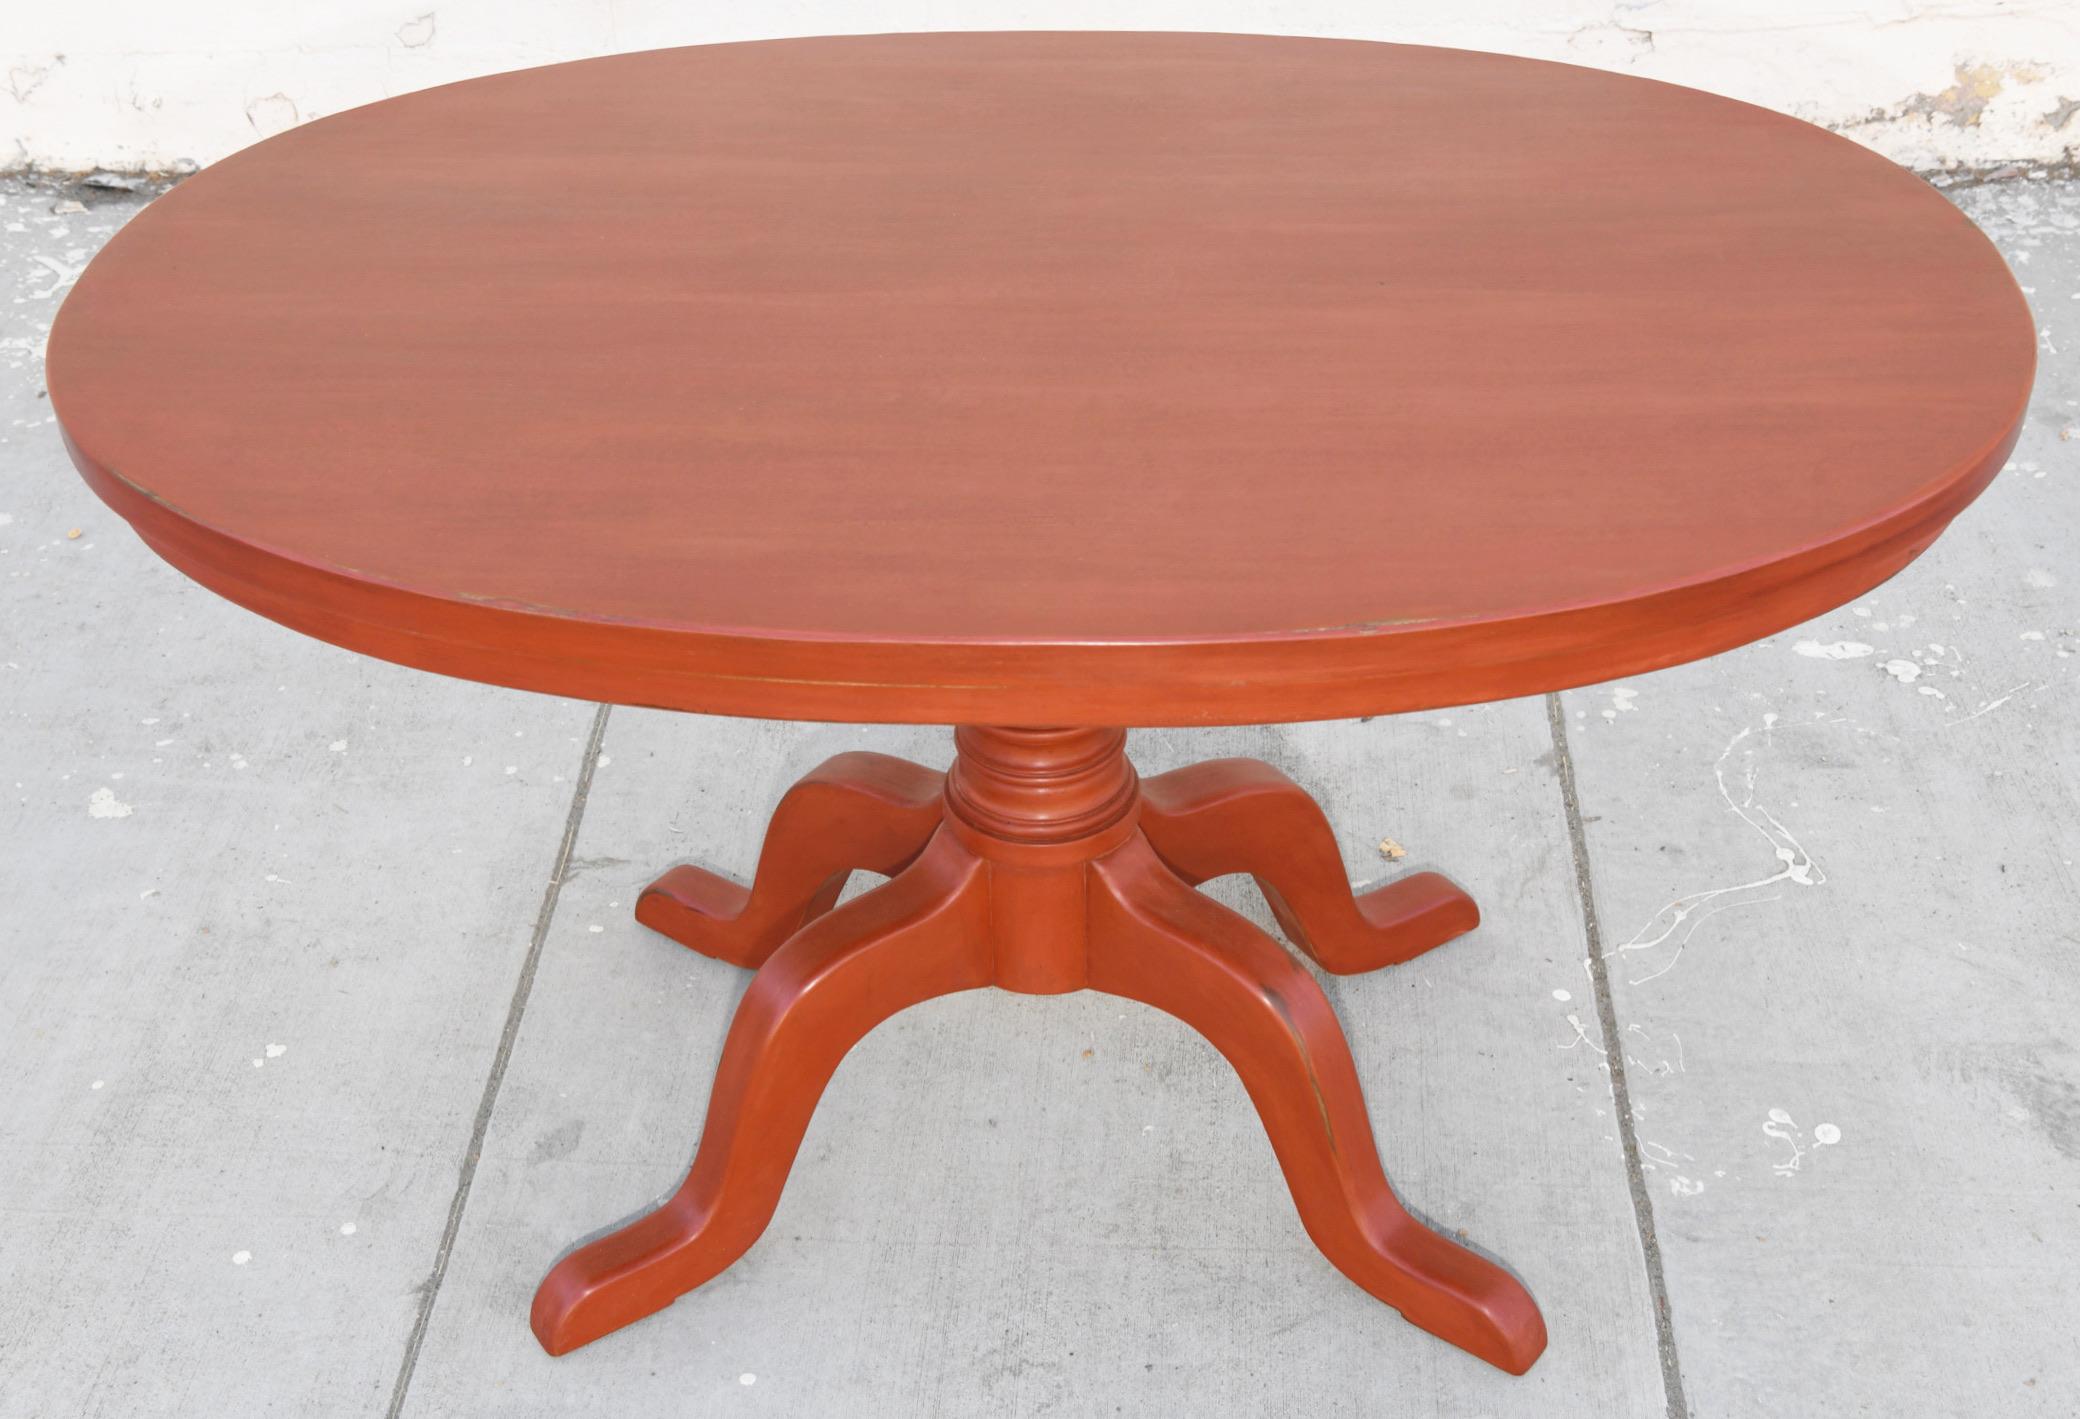 Hand-Crafted Custom Orange Painted Pedestal Table, Made to Order by Petersen Antiques For Sale